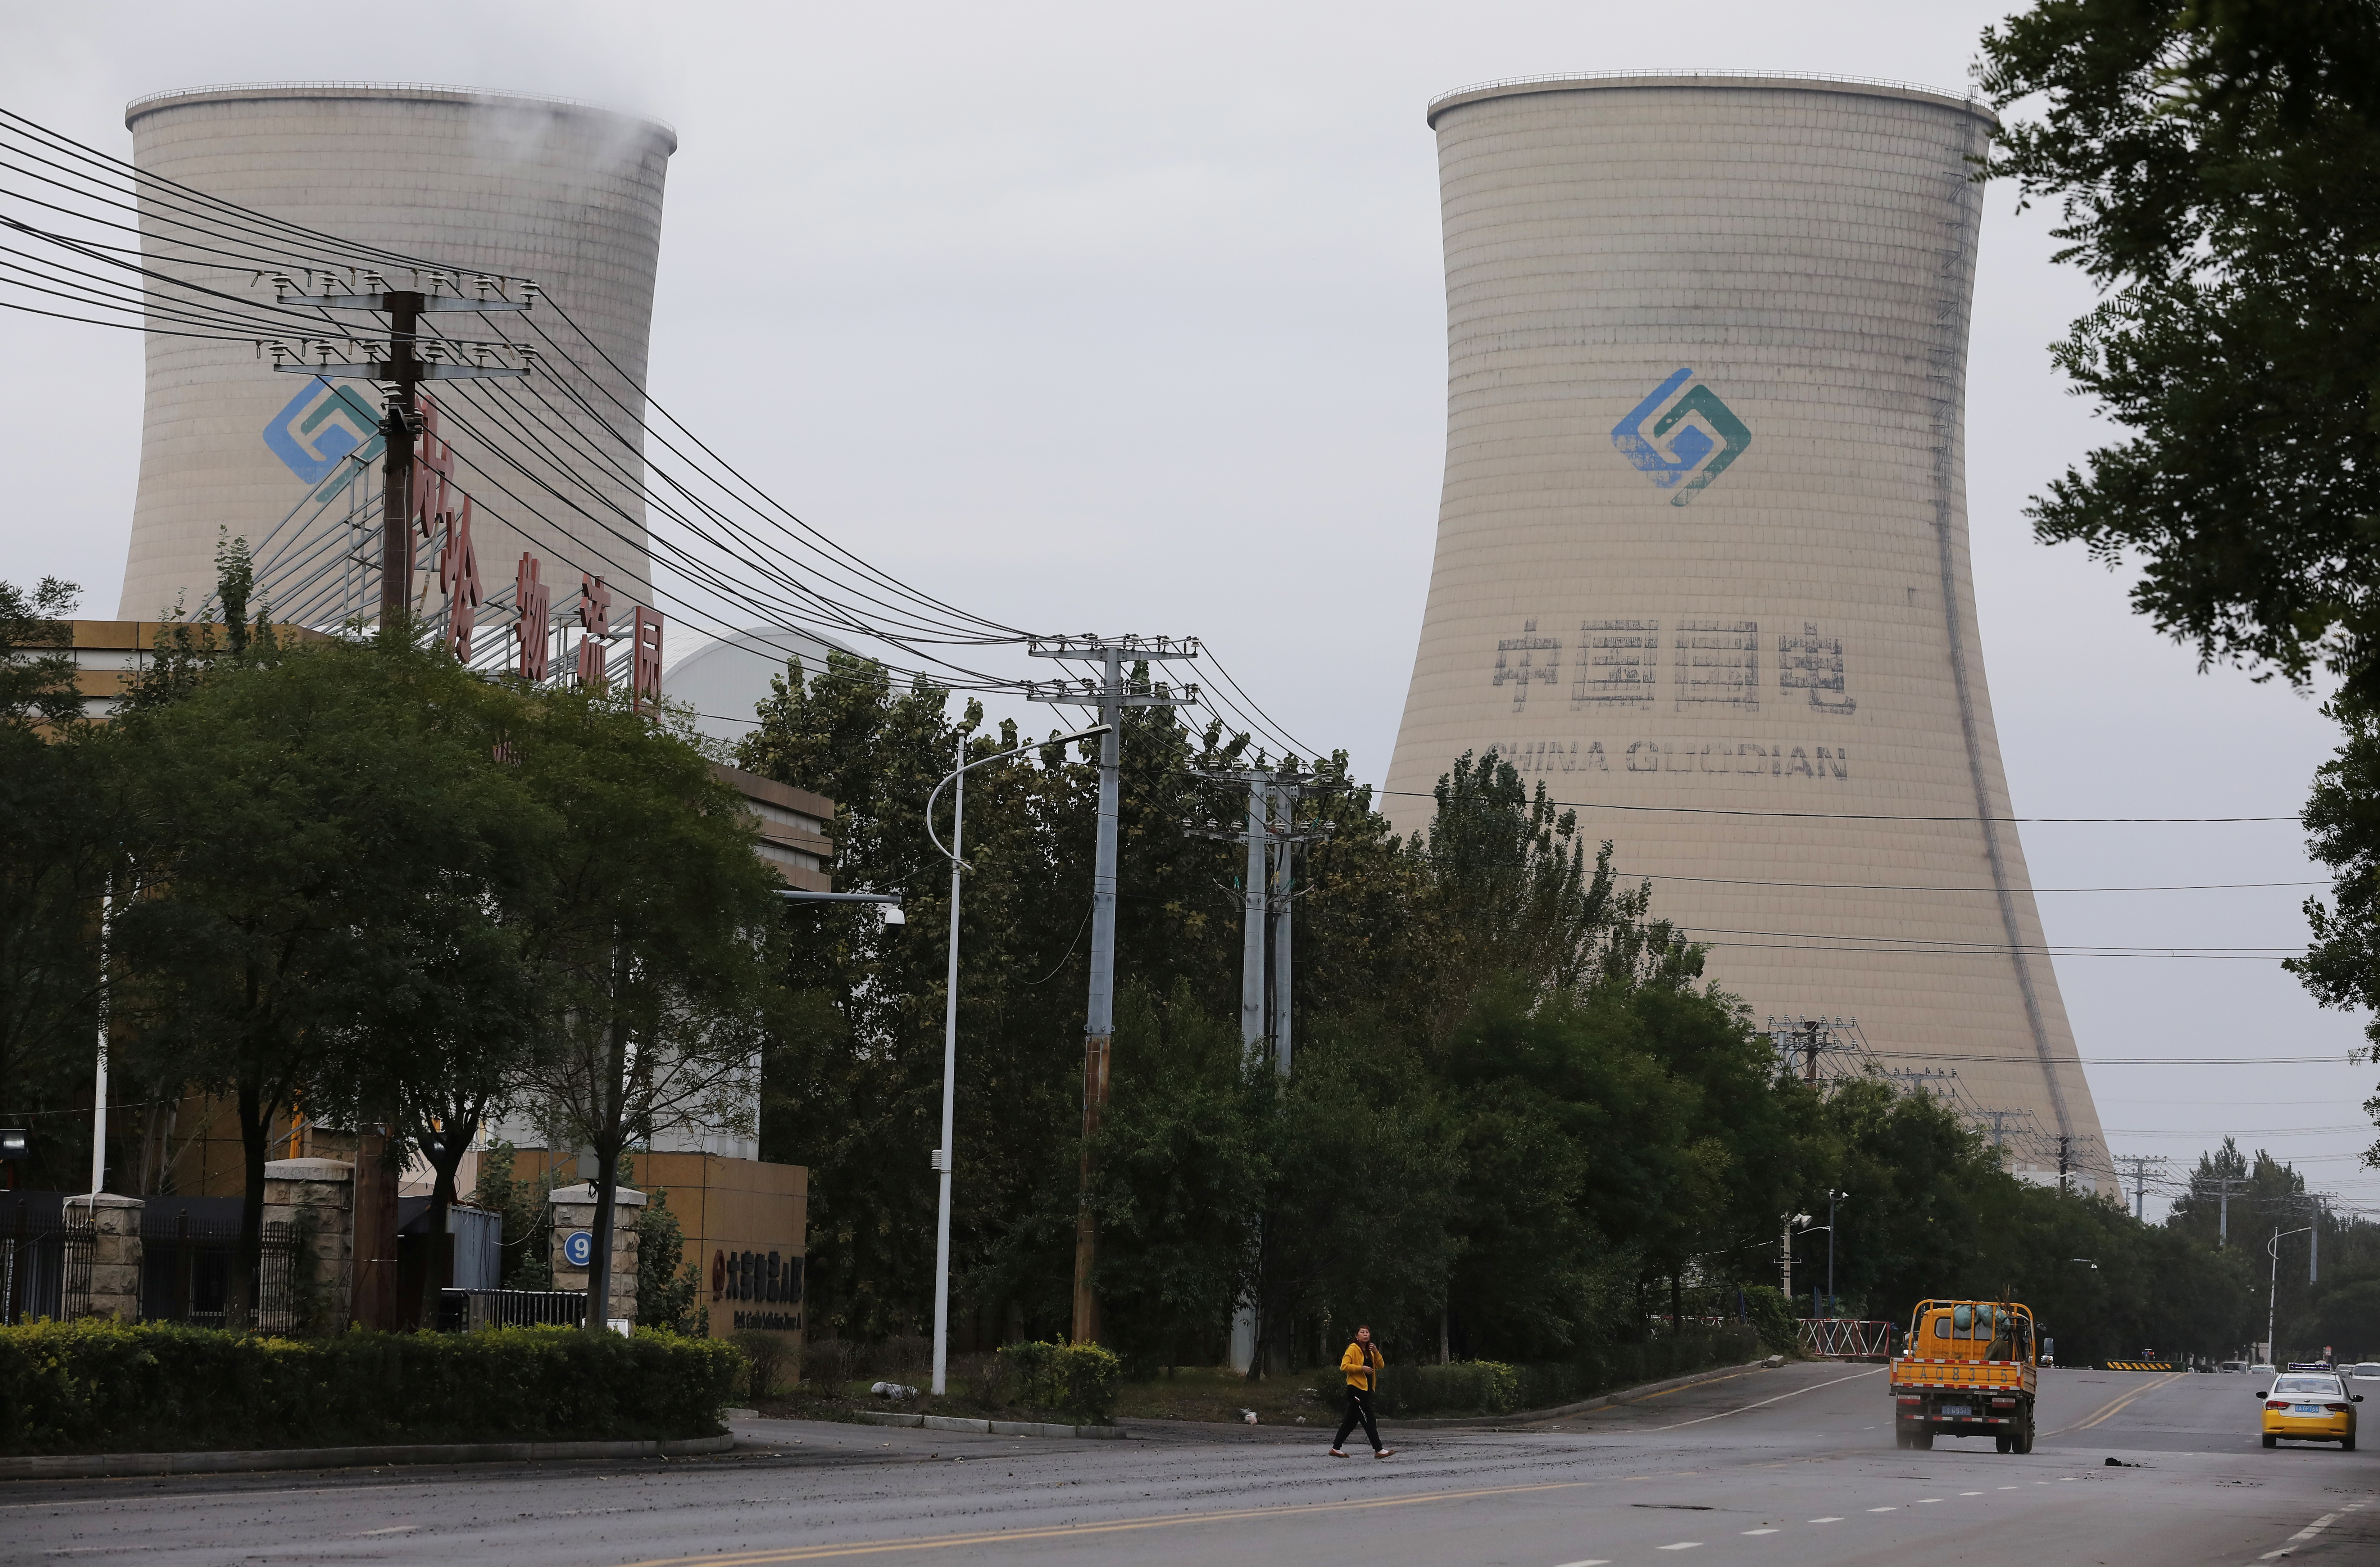 China Energy coal-fired power plant is pictured in Shenyang, Liaoning